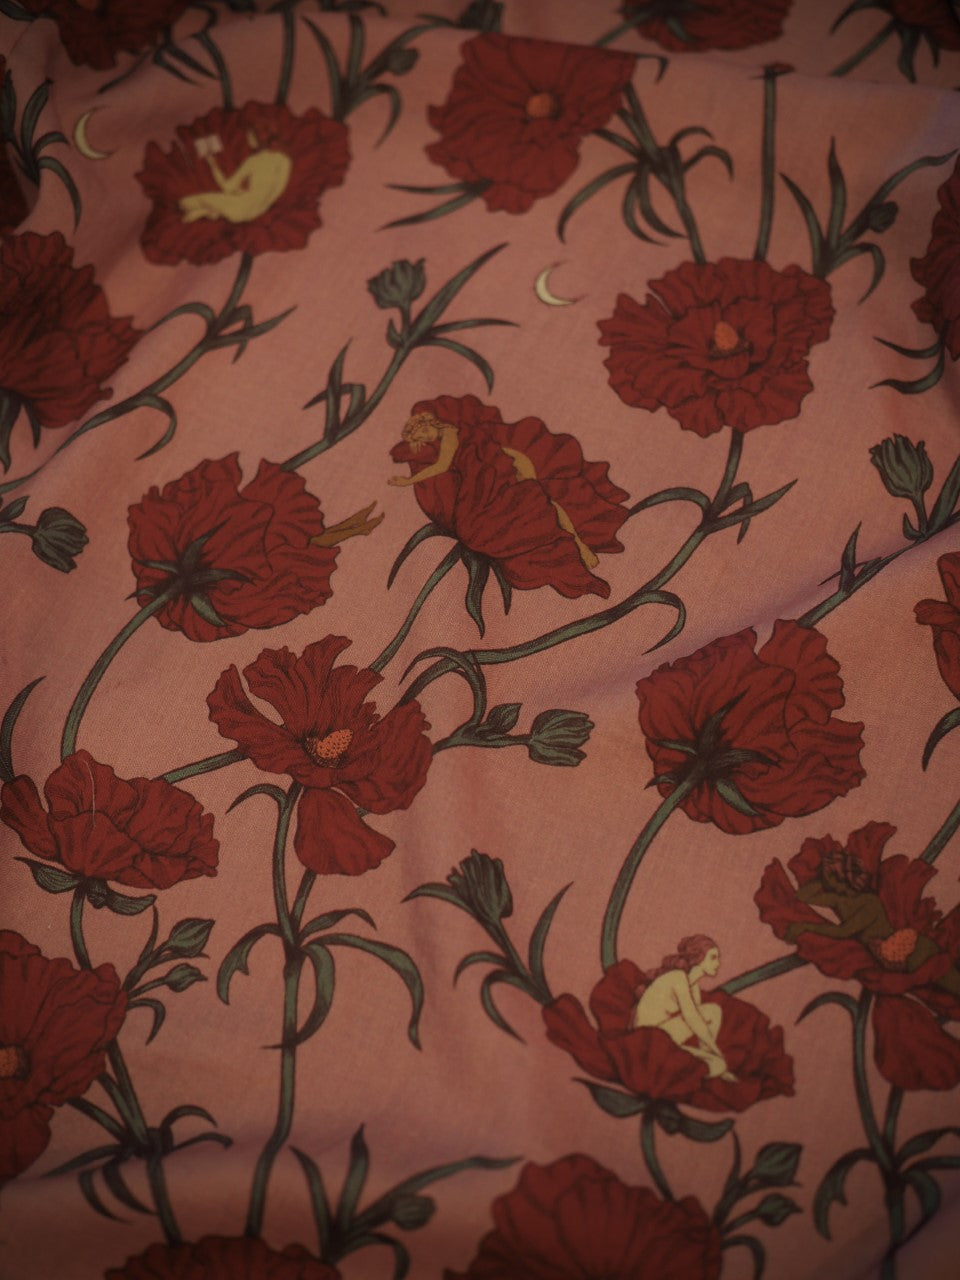 Lightweight eco-friendly Tencel fabric showing print of "The Women who Sleep Among the Flowers" in pink and red (rose) colorway